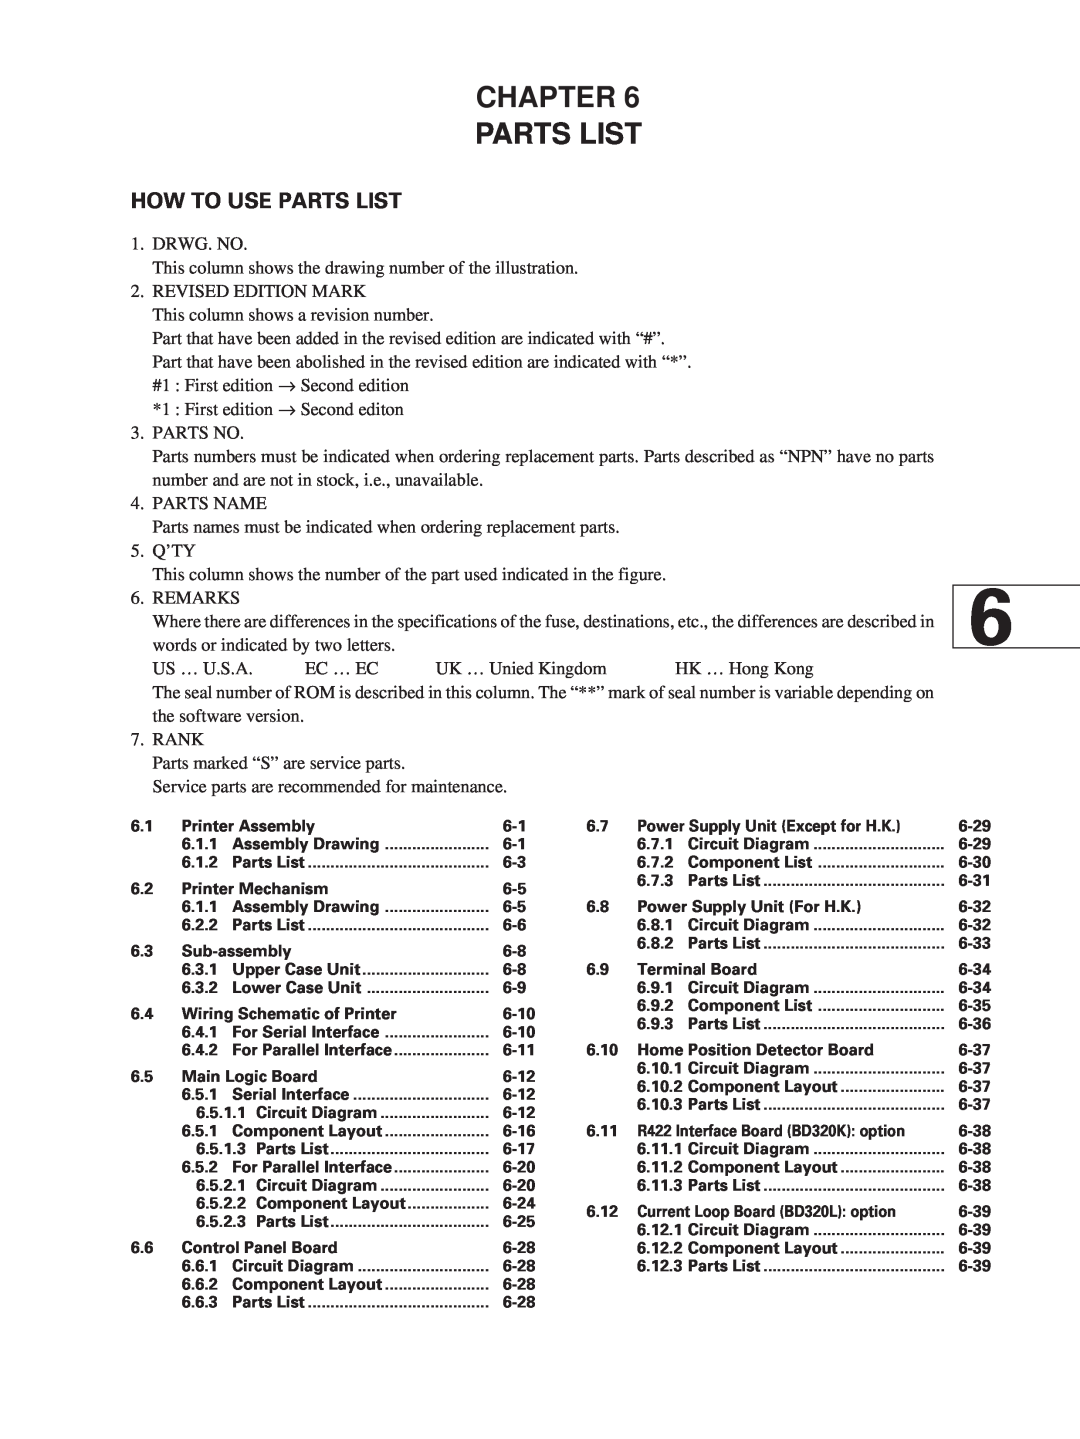 Star Micronics SP320S technical manual Chapter Parts List, How To Use Parts List 